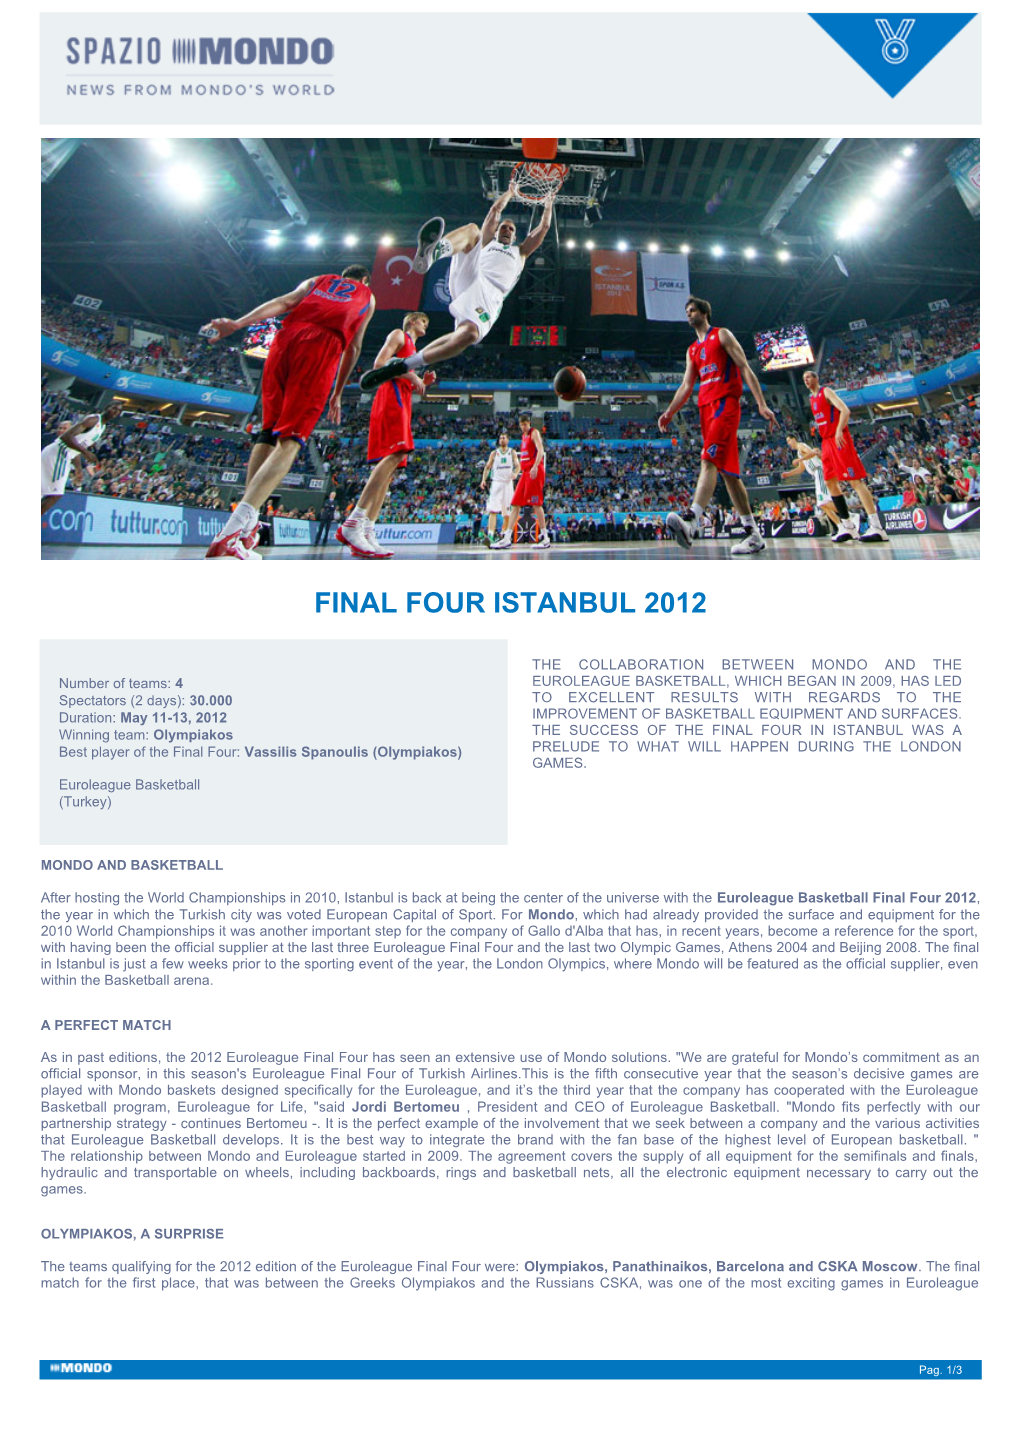 Final Four Istanbul 2012